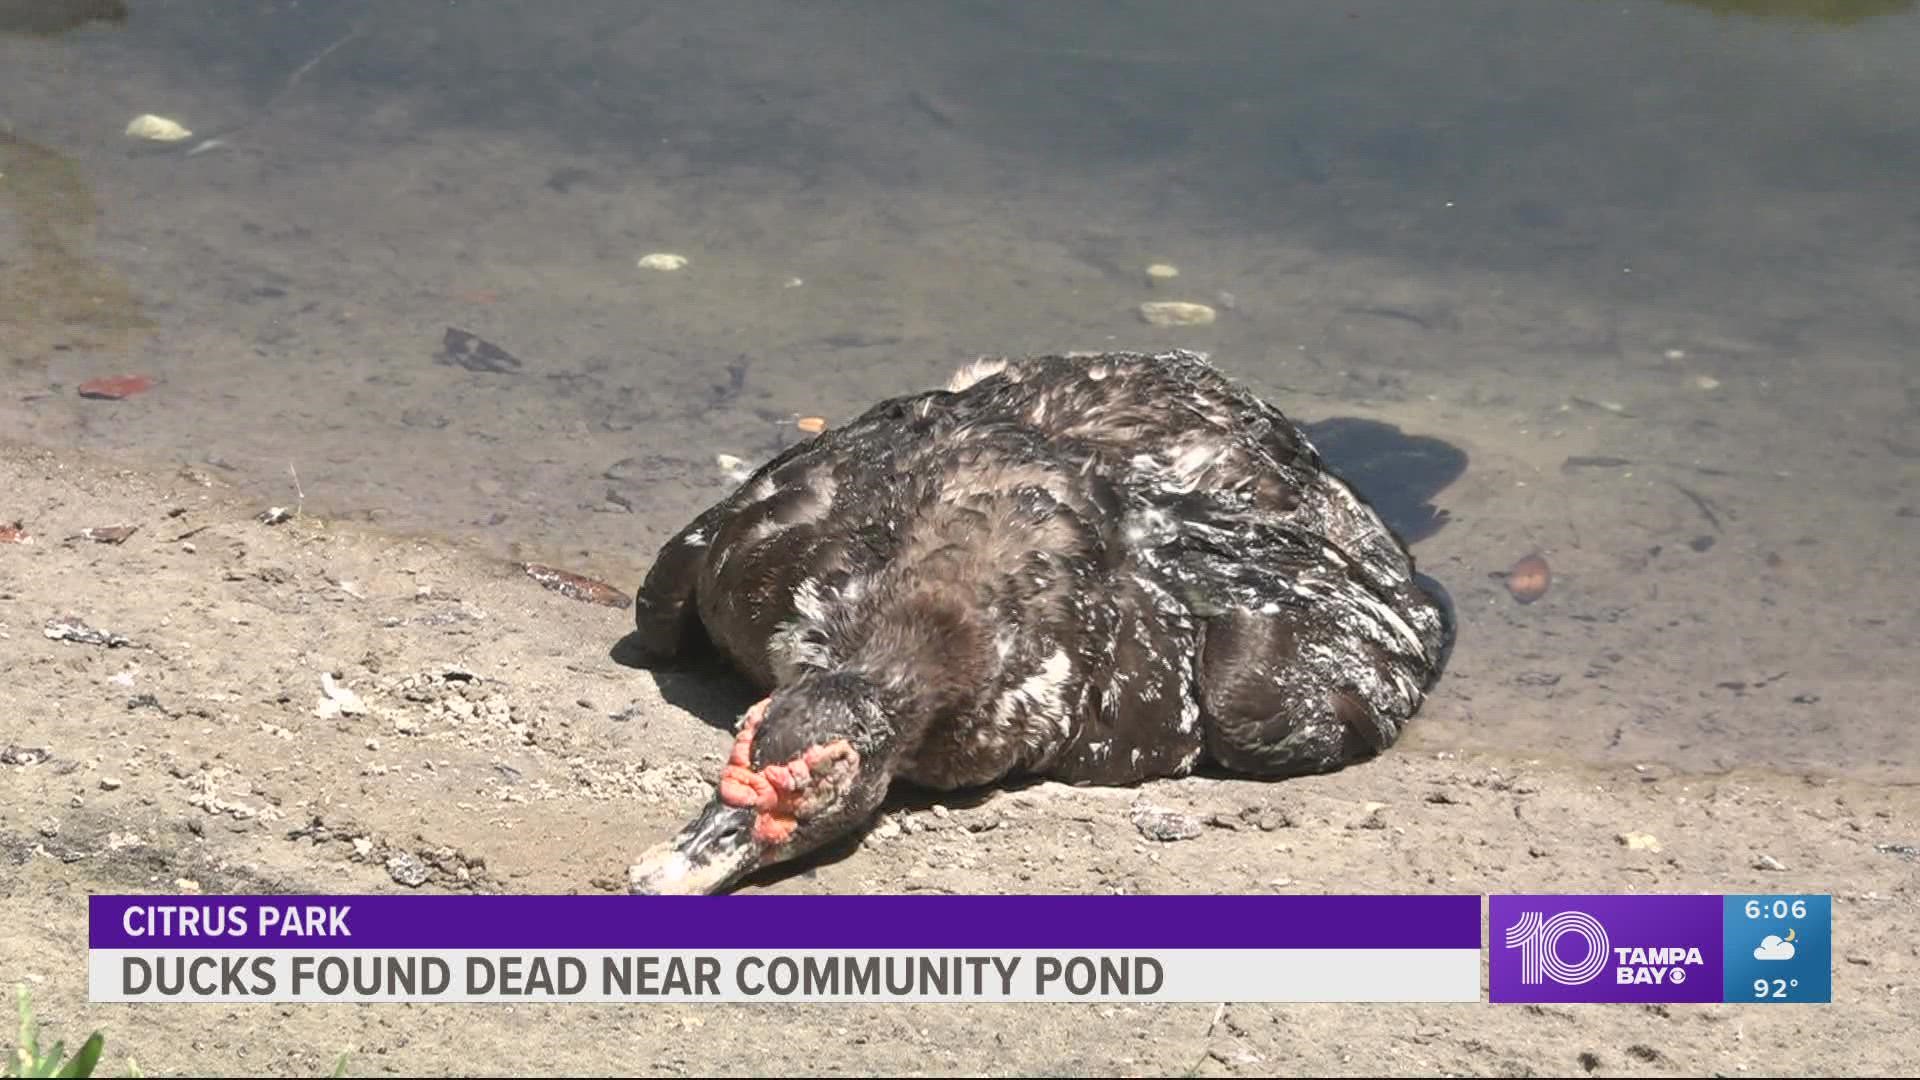 Neighbors say the ducks that are still alive look sick and as if they are suffering.